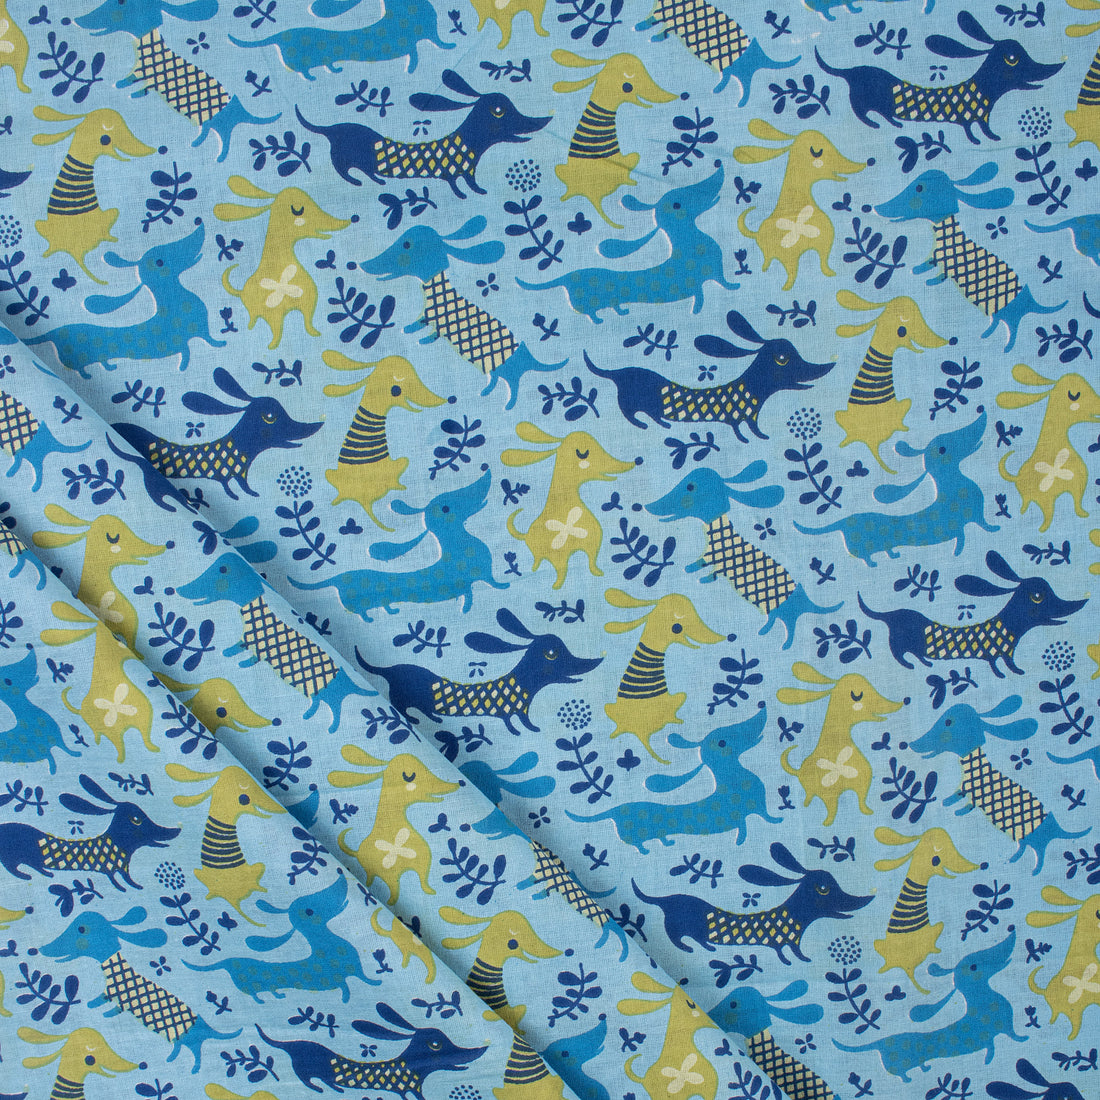 Voile Animal Hand Block Printed Cotton Fabric